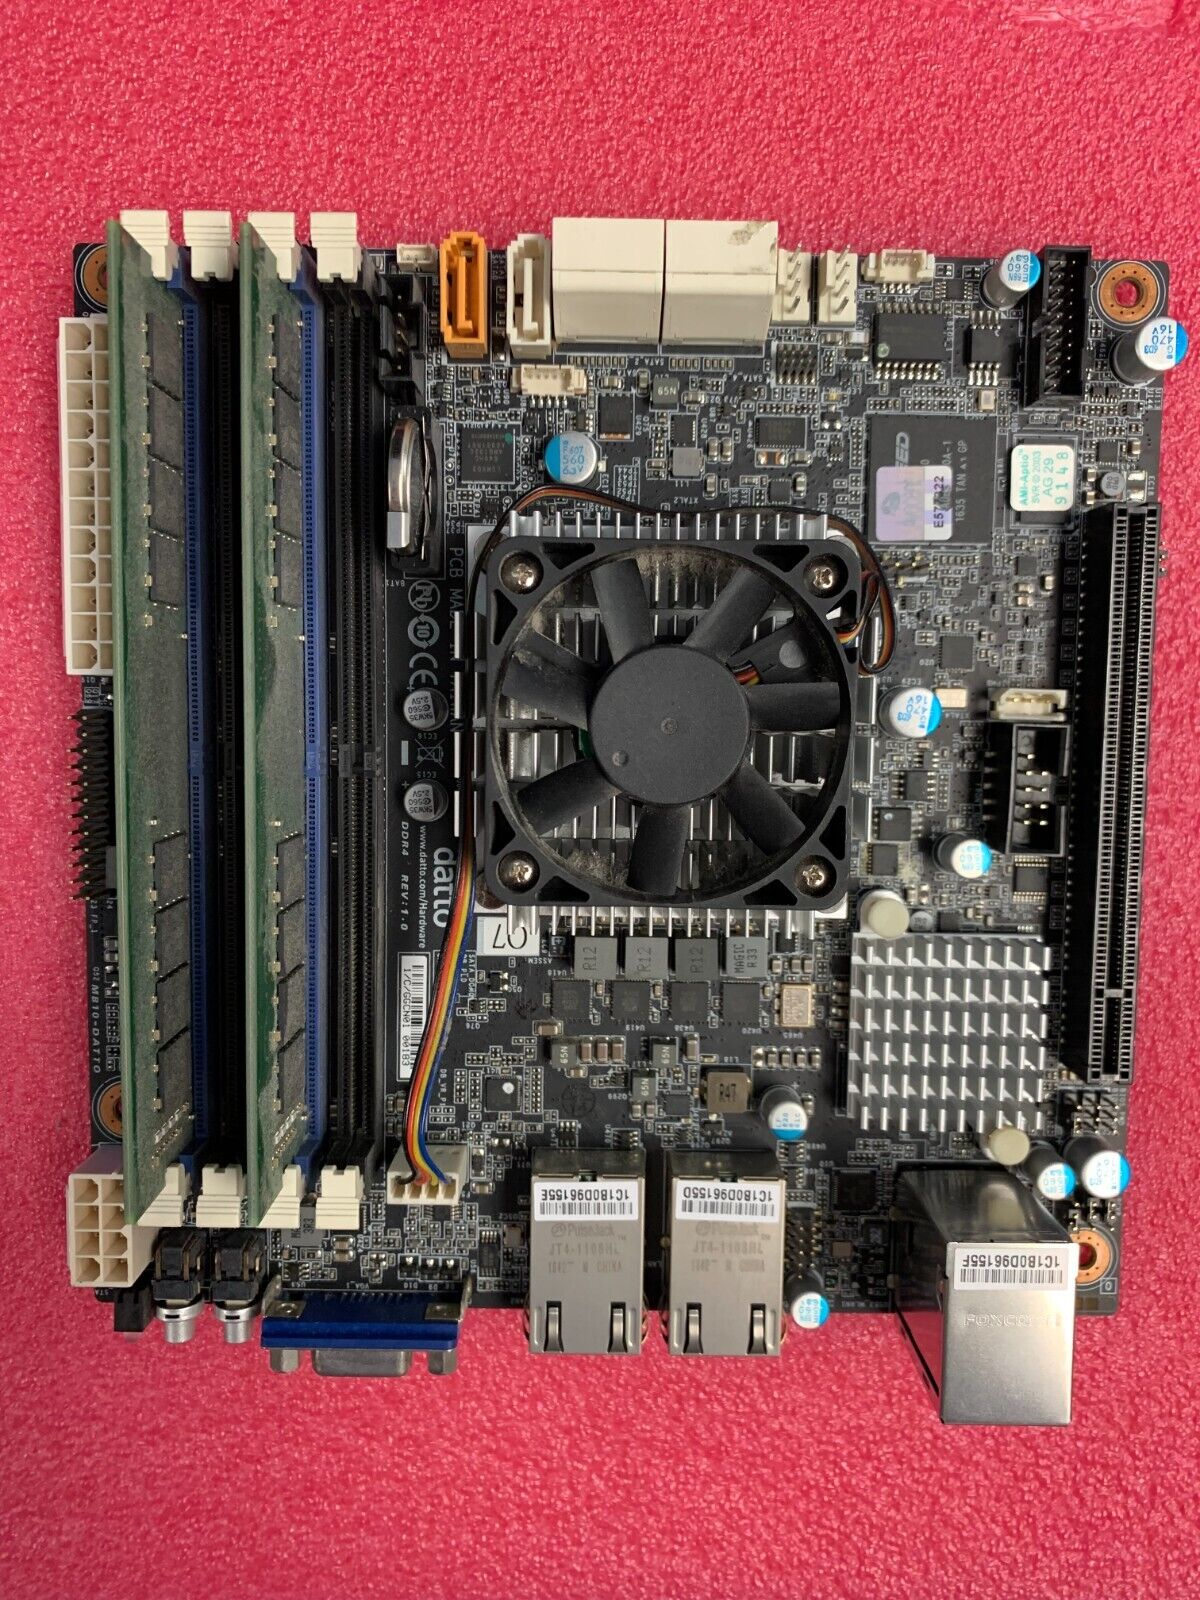 GIGABYTE MB10-Datto Motherboard Xeon D-1521-Tested Working-30 Day Money Back